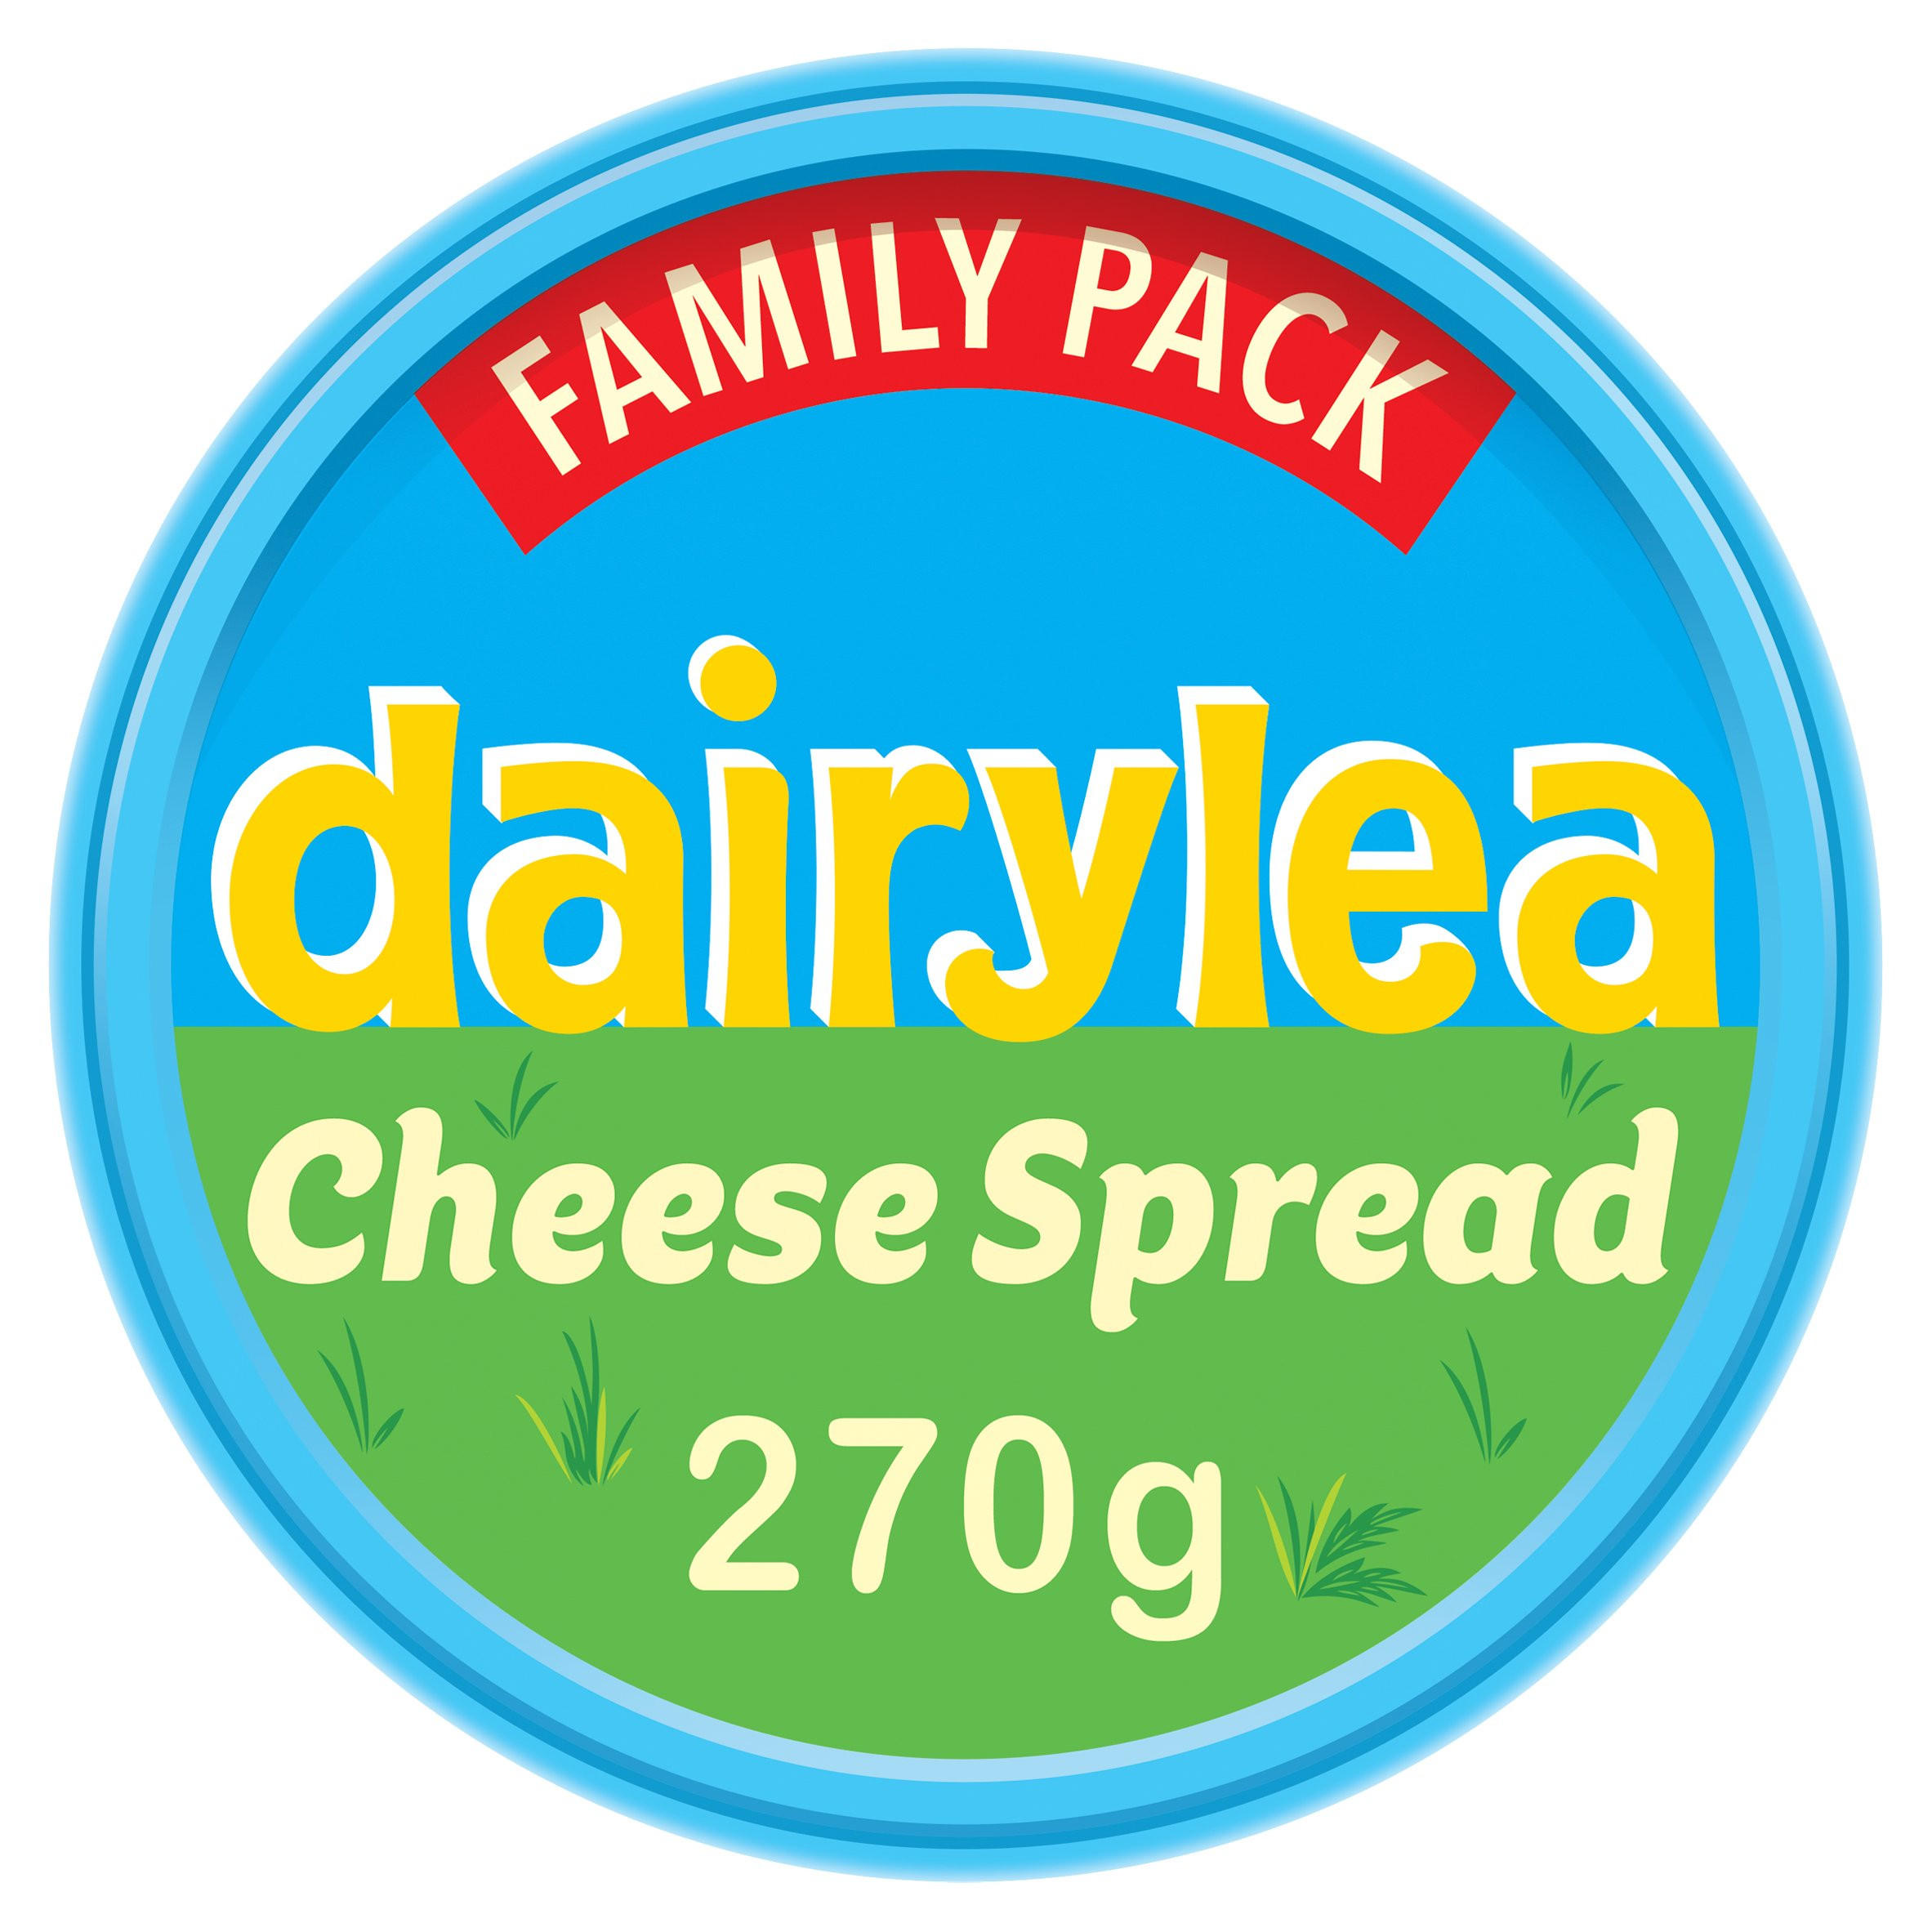 Dairylea Cheese Spread 270g | Cheese Snacks & Spreads | Iceland Foods